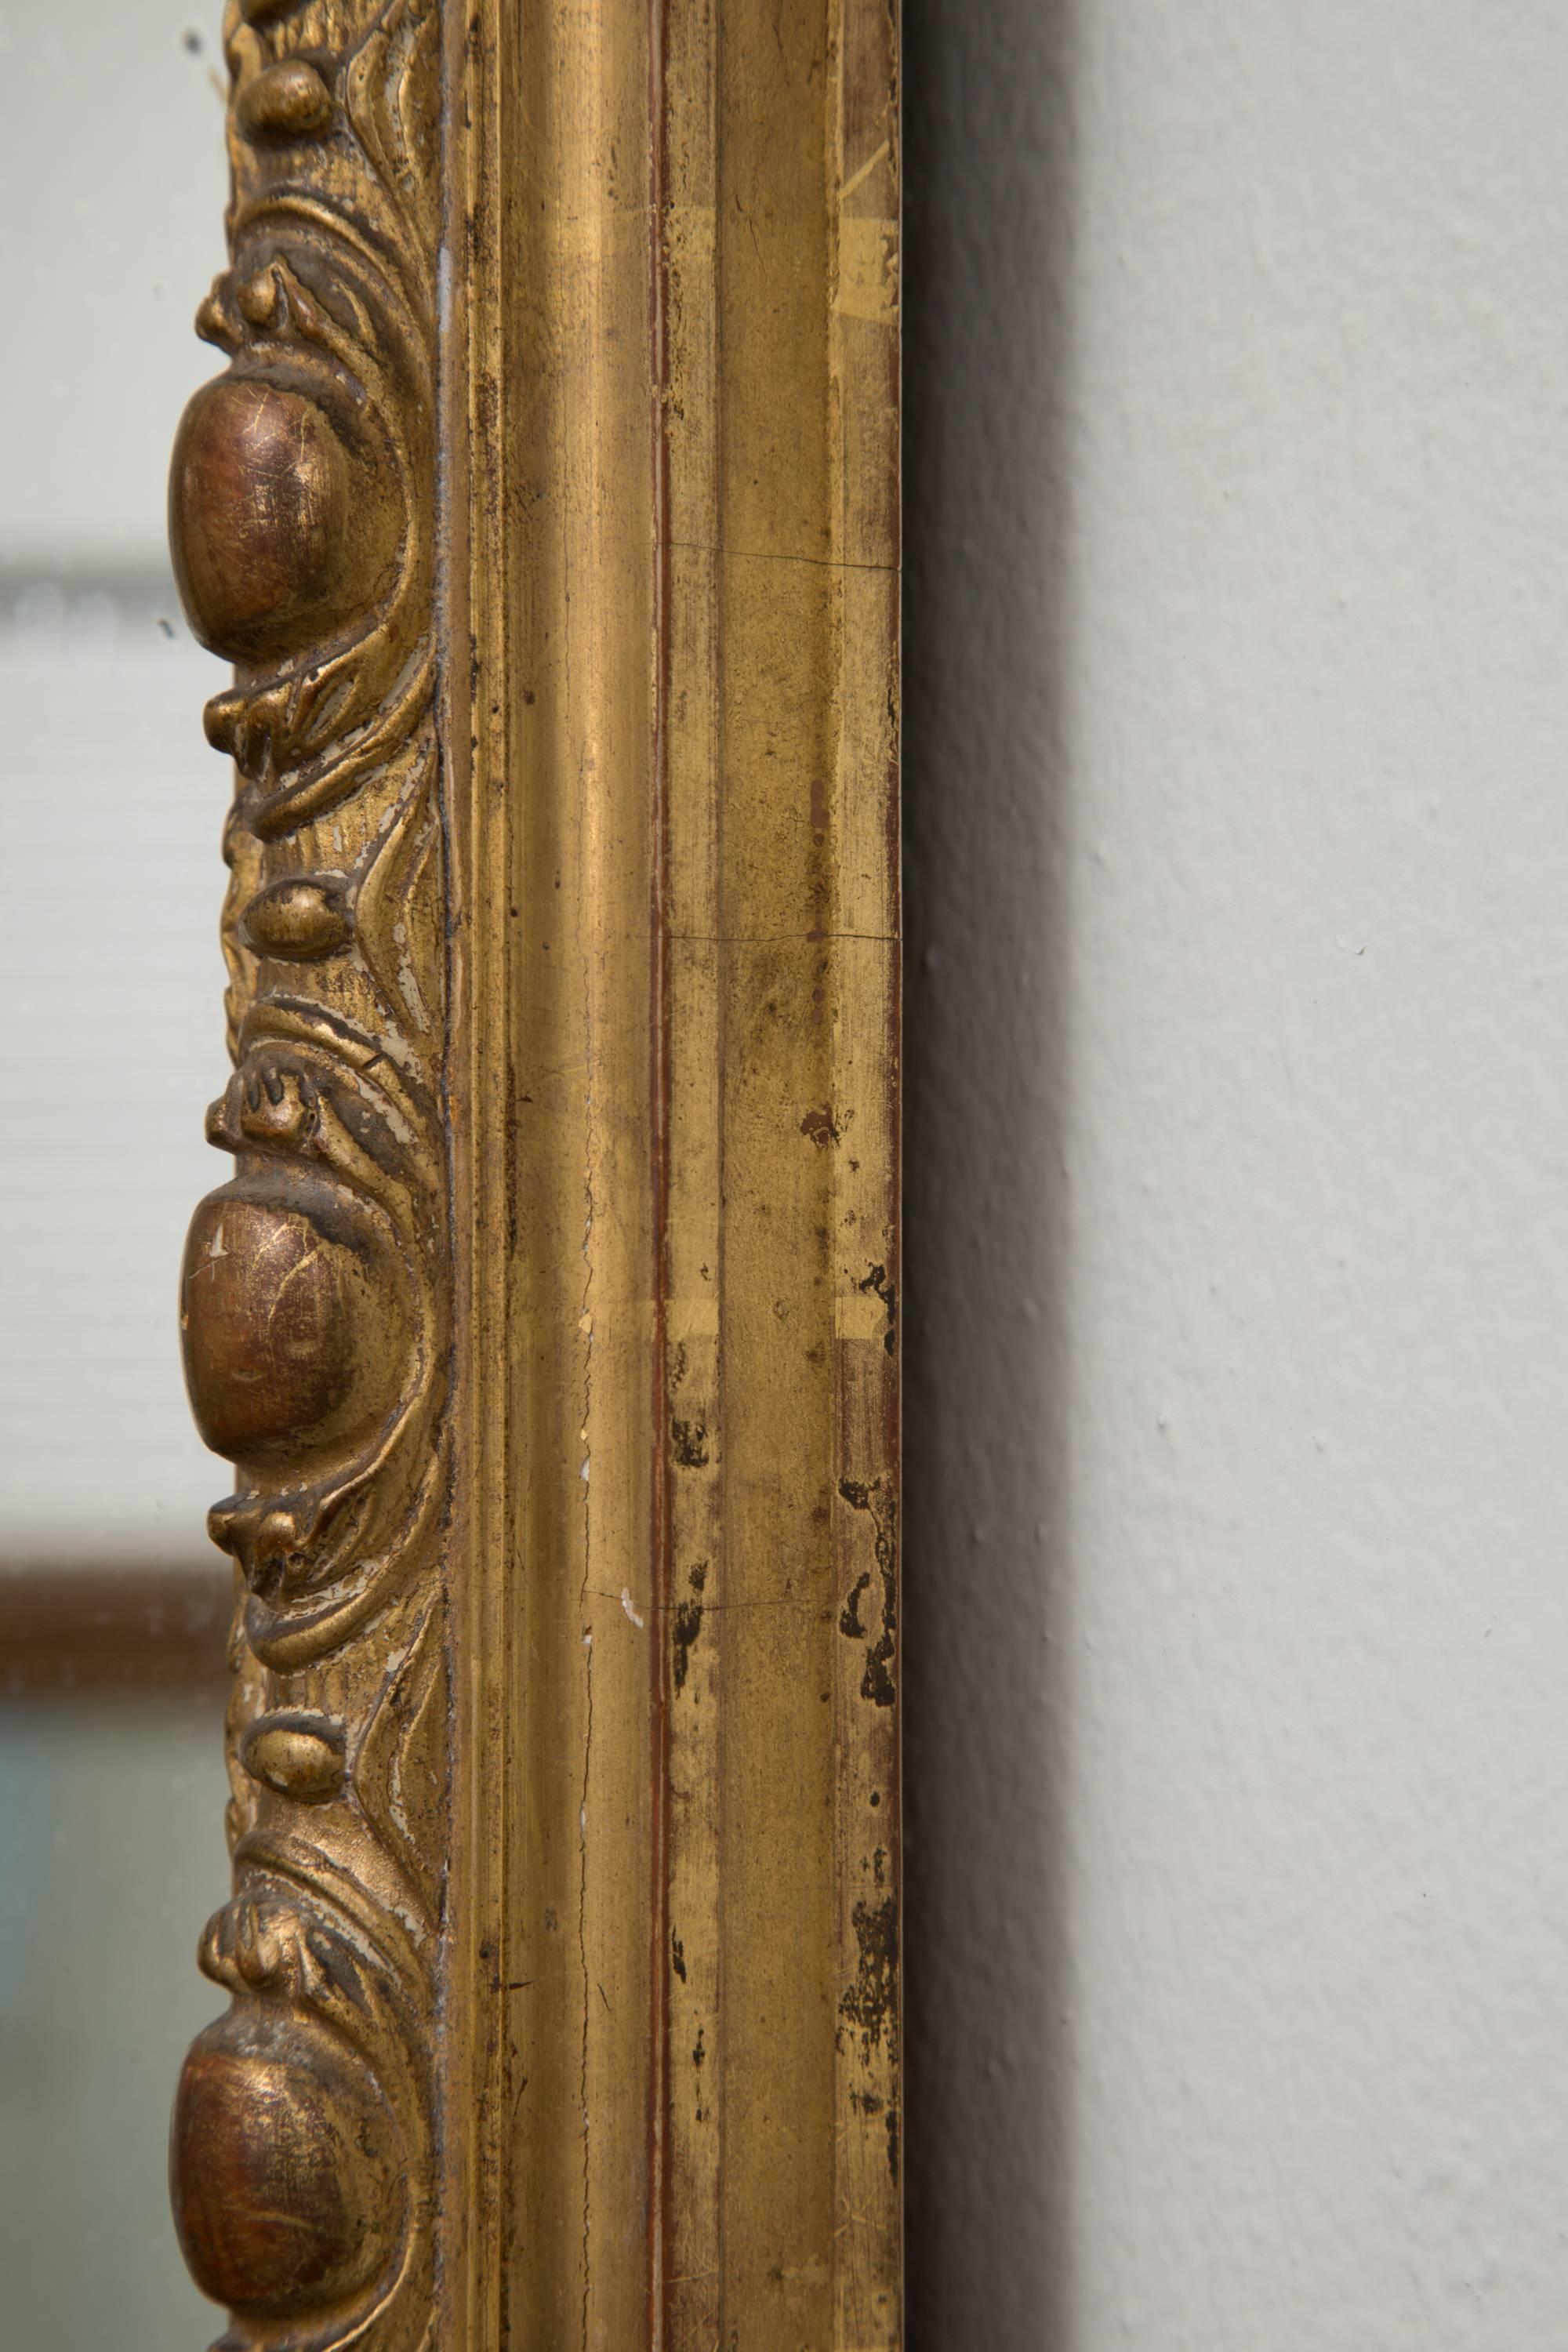 This is a formal French mirror with a pierced ornate cornice above a mirror plate framed by a mirrored border edged with bead molding and ornate corner embellishments, circa 19th century.